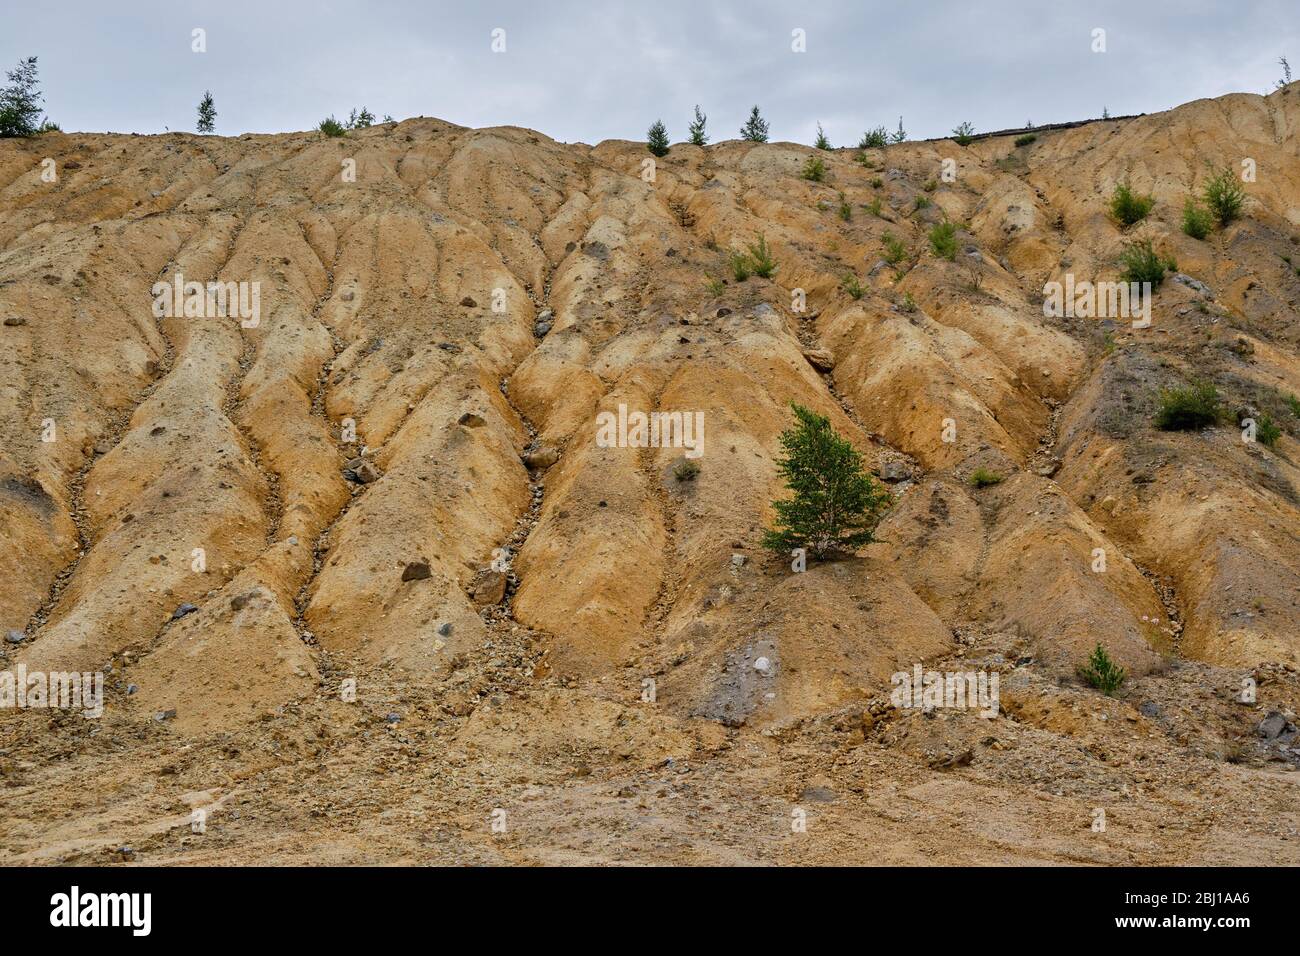 Bor / Serbia - July 13, 2019: Soil erosion and degradation due to industrial pollution in copper mine in Bor, Serbia, owned by Chinese mining company Stock Photo